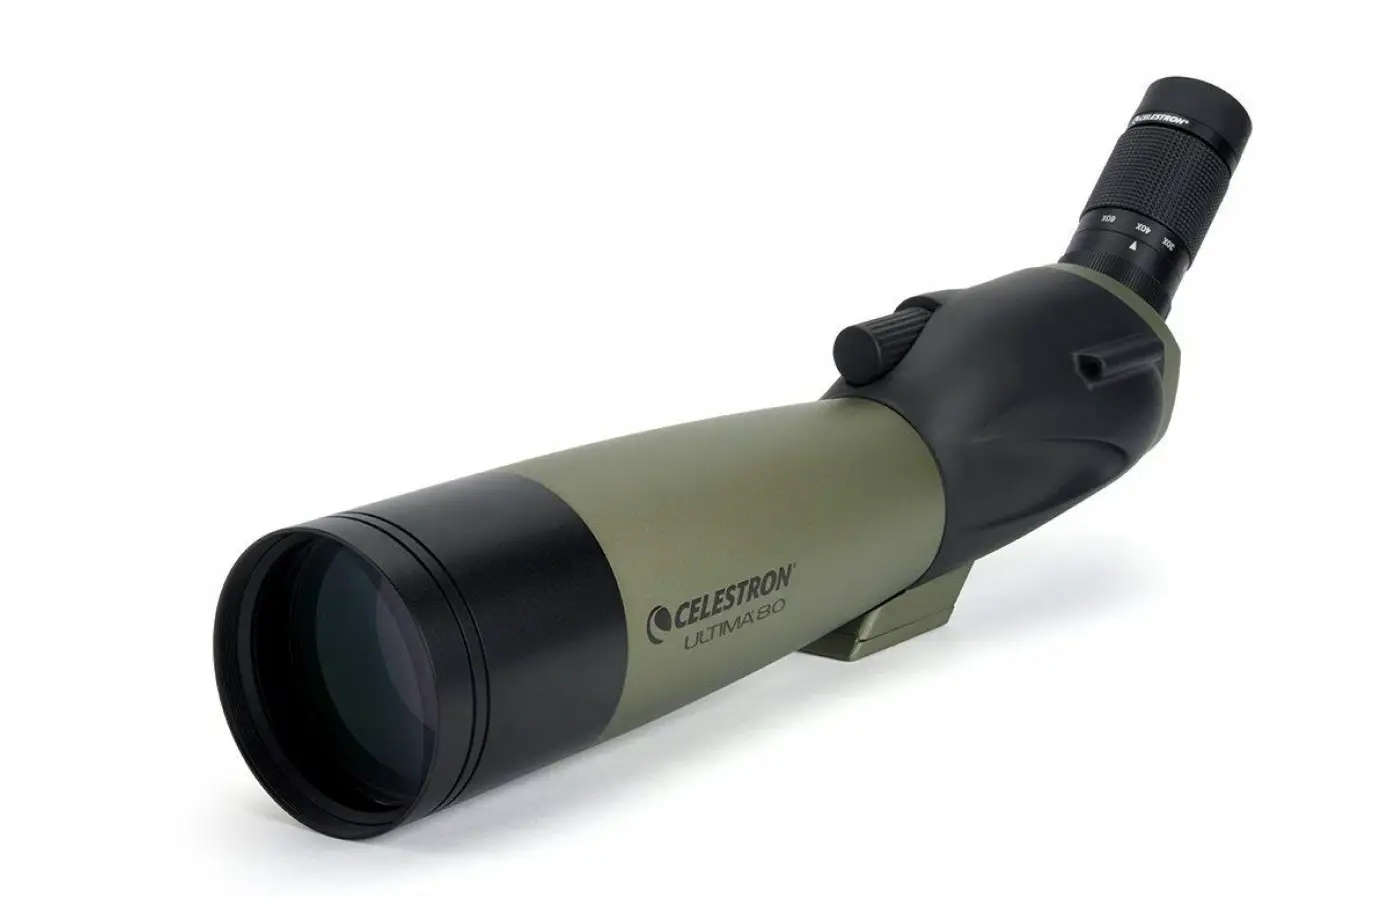 The Celestron Ultima 80 oggers a 45 degree viewing angle.